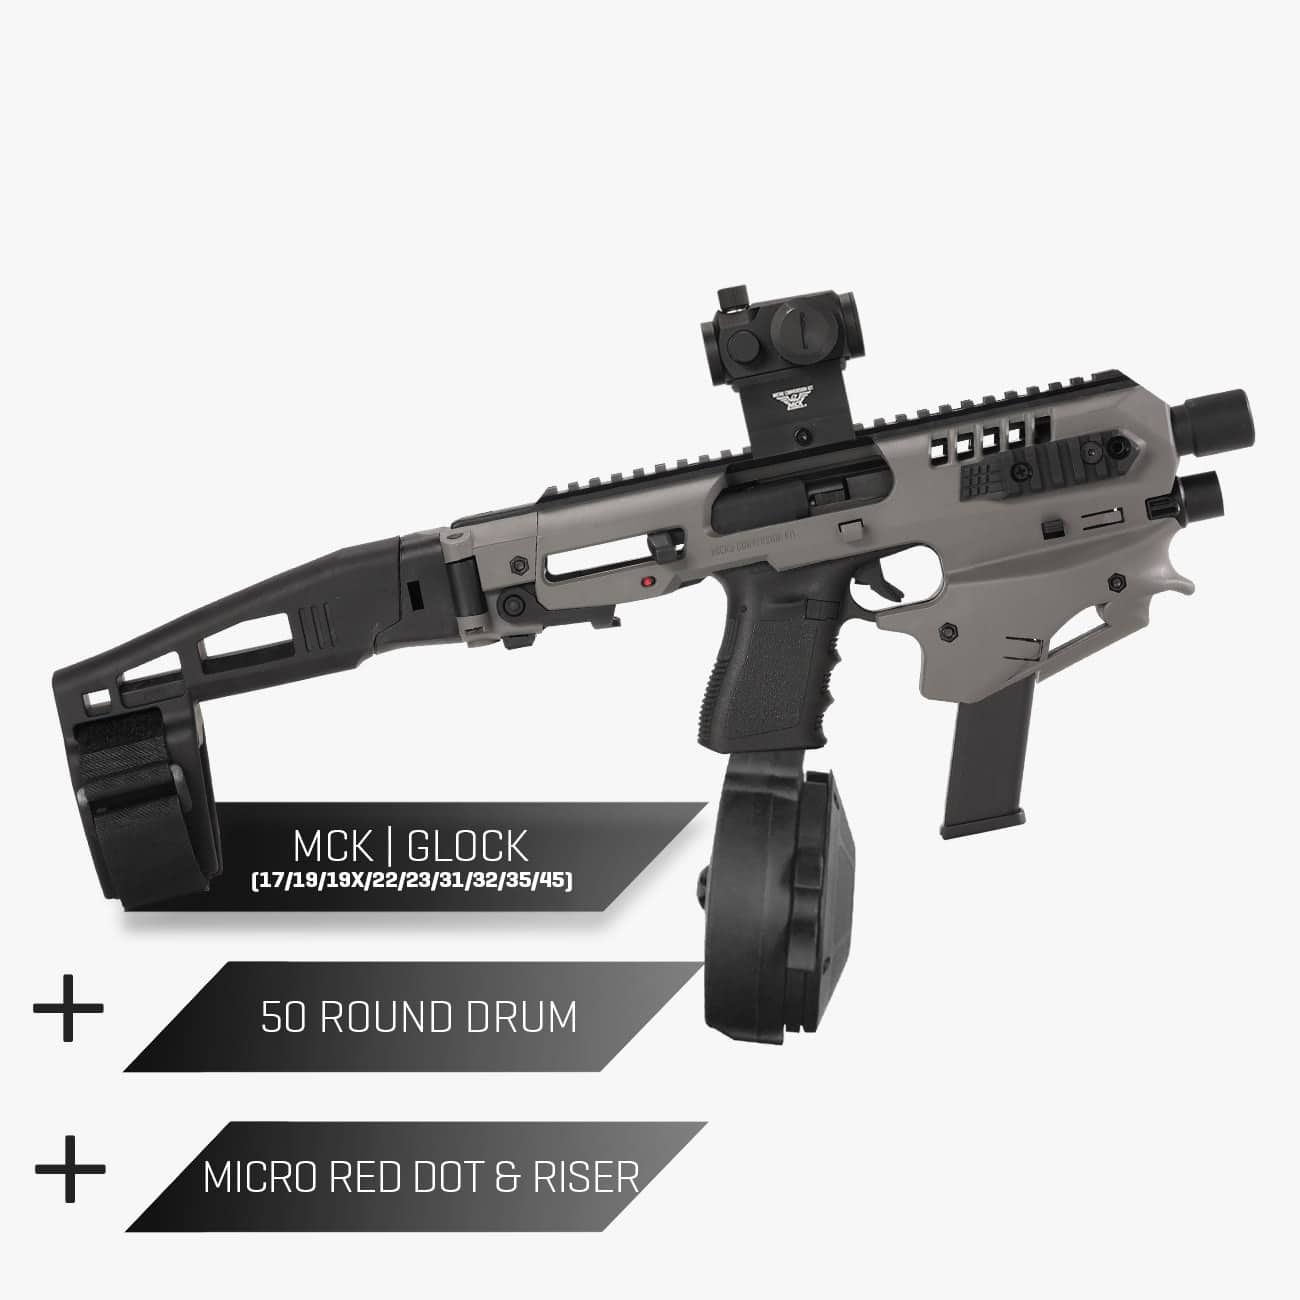 Conversion Kit + MRD + Glock Drum and other tactical products such as, Micr...